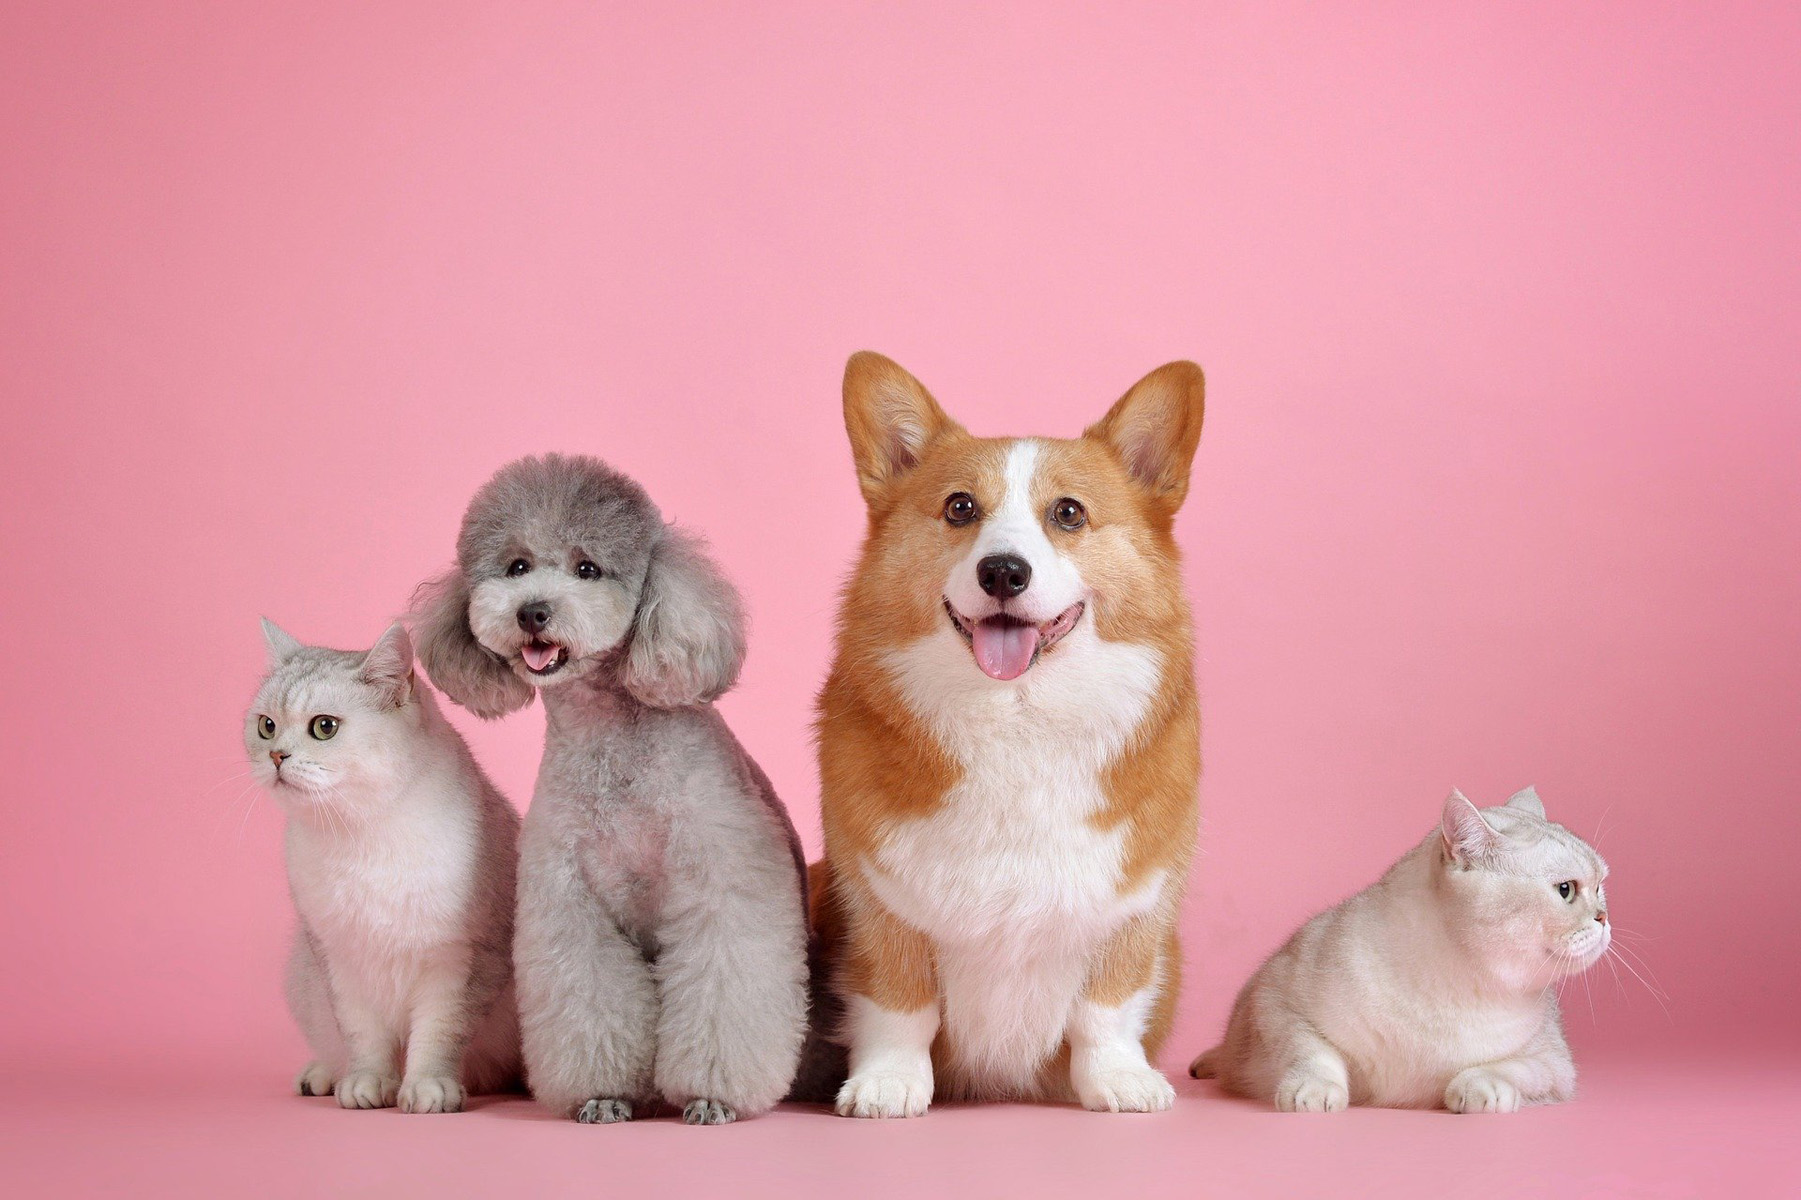 two white cats, a gray poodle, and a corgi sitting in a row against a pink background